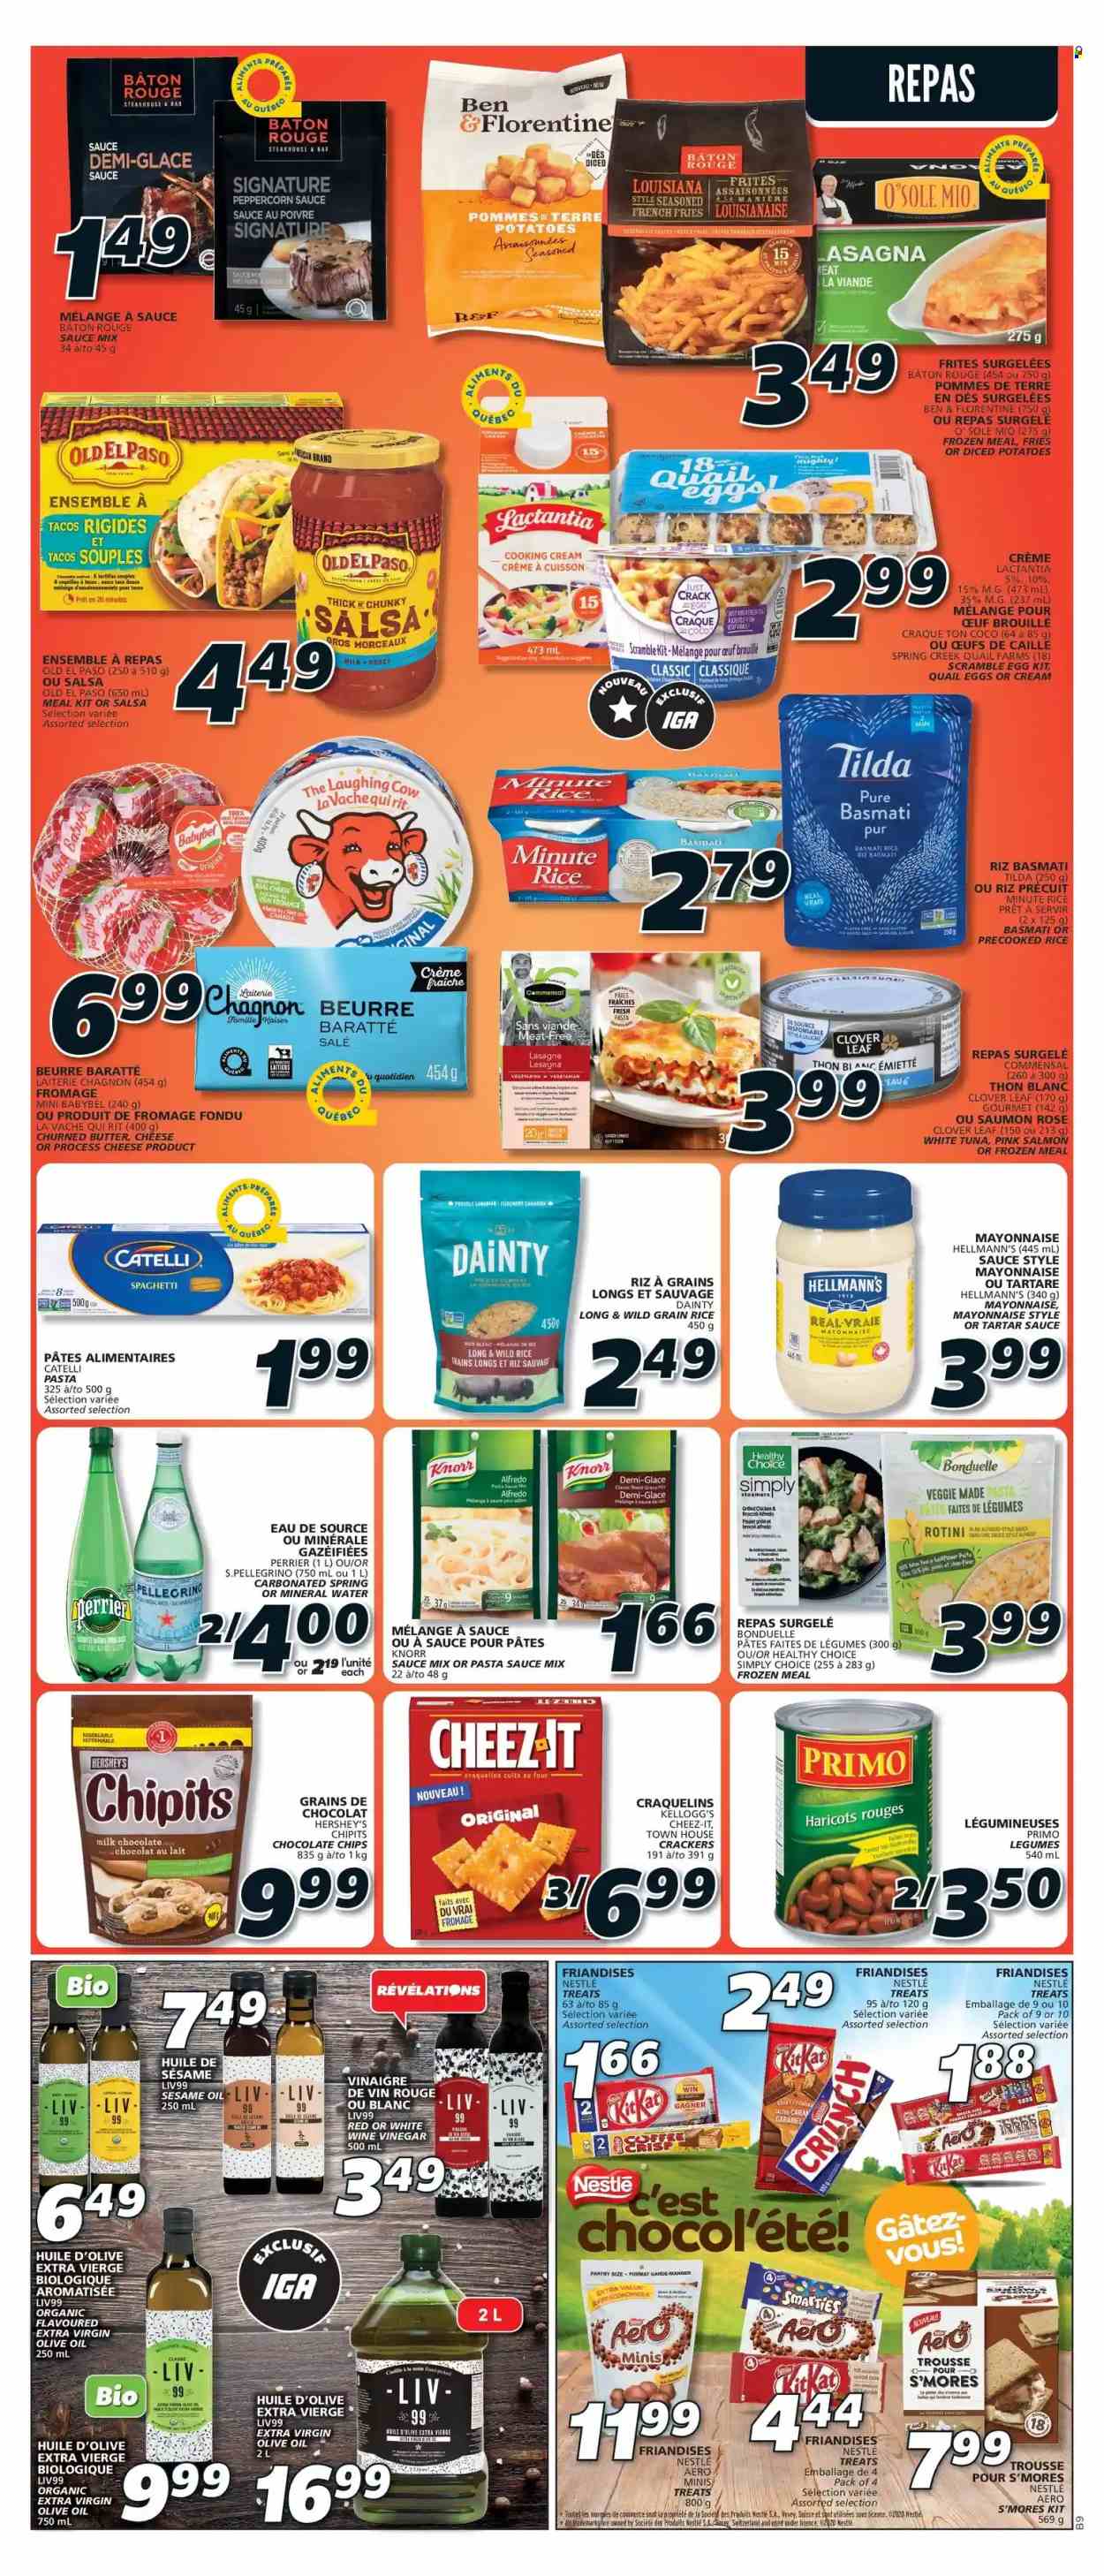 thumbnail - IGA Flyer - June 30, 2022 - July 06, 2022 - Sales products - Old El Paso, tacos, broccoli, potatoes, salmon, spaghetti, pasta sauce, lasagna meal, Alfredo sauce, Healthy Choice, The Laughing Cow, Babybel, Clover, butter, crème fraîche, tartar sauce, Hellmann’s, Hershey's, potato fries, french fries, milk chocolate, KitKat, crackers, Kellogg's, Cheez-It, basmati rice, rice, gravy mix, caramel, salsa, extra virgin olive oil, sesame oil, wine vinegar, olive oil, oil, Perrier, mineral water, San Pellegrino, rosé wine, quail, Nestlé, Knorr, Smarties. Page 8.